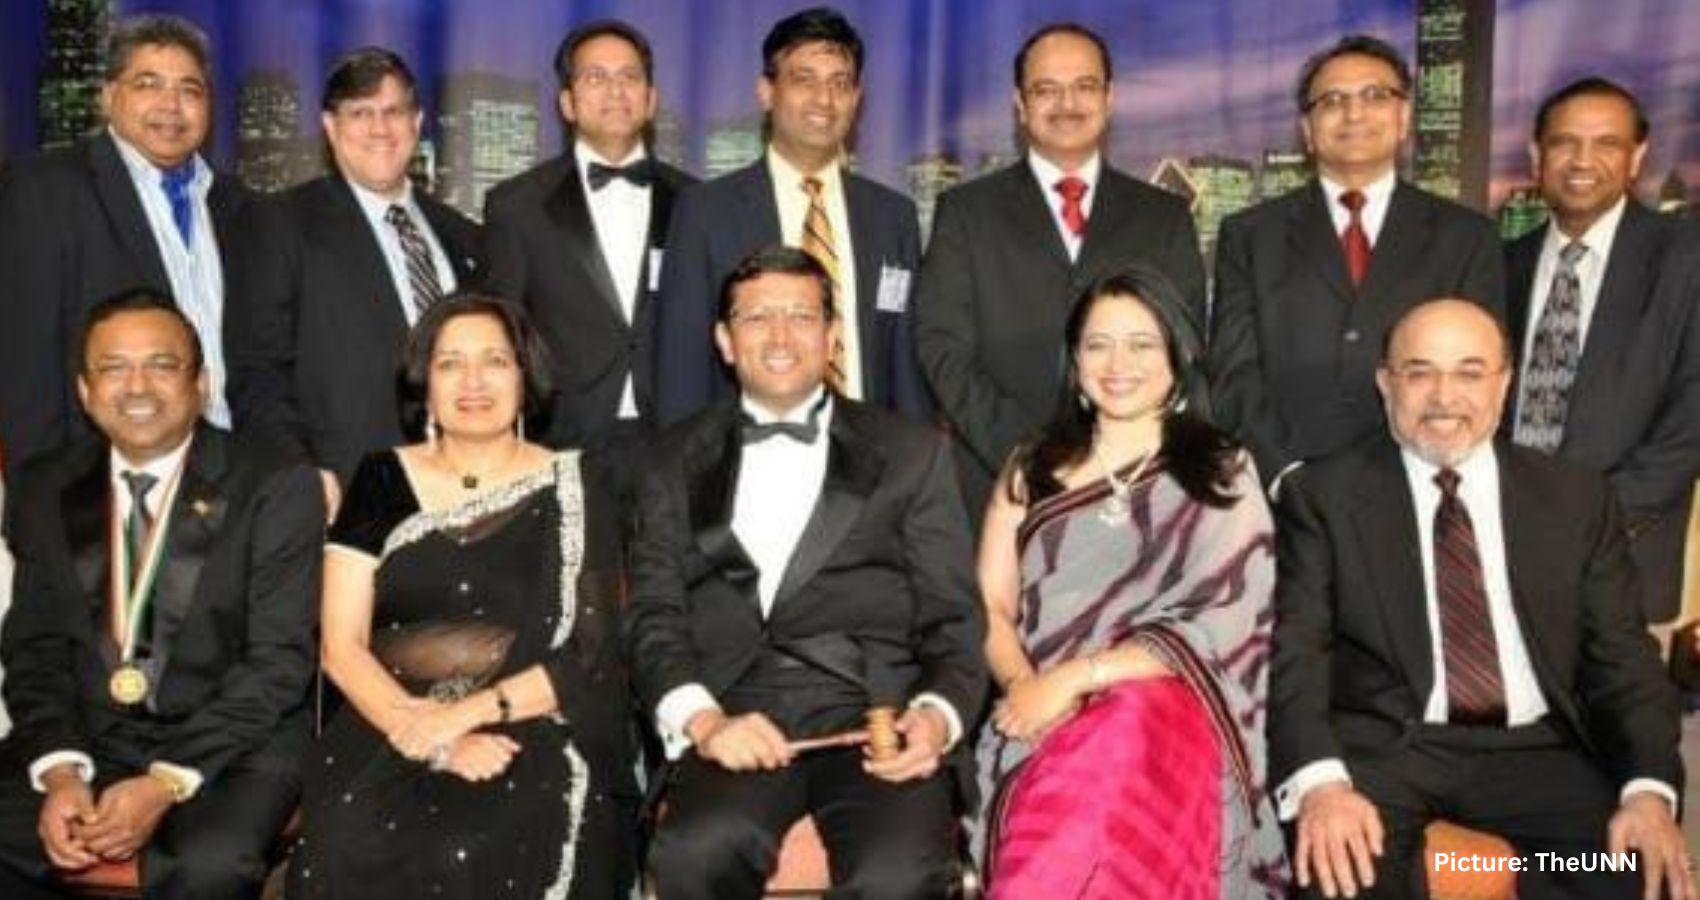 Featured & Cover Dr Kavita Gupta Elected Chair Of AAPI Board of Trustees